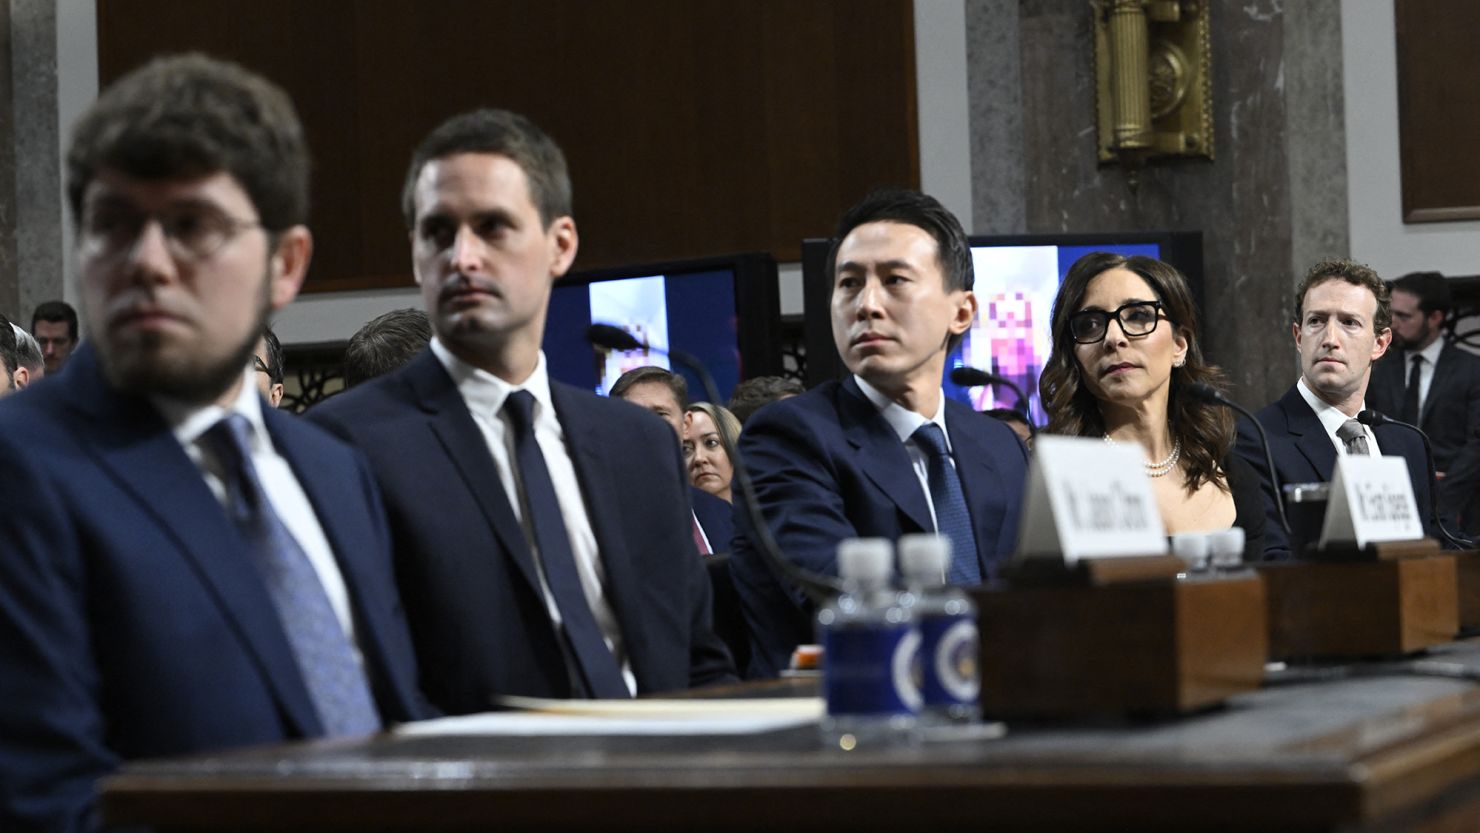 Jason Citron, CEO of Discord; Evan Spiegel, CEO of Snap; Shou Zi Chew, CEO of TikTok; Linda Yaccarino, CEO of X; and Mark Zuckerberg, CEO of Meta, appear at a Senate hearing on January 31, 2024.